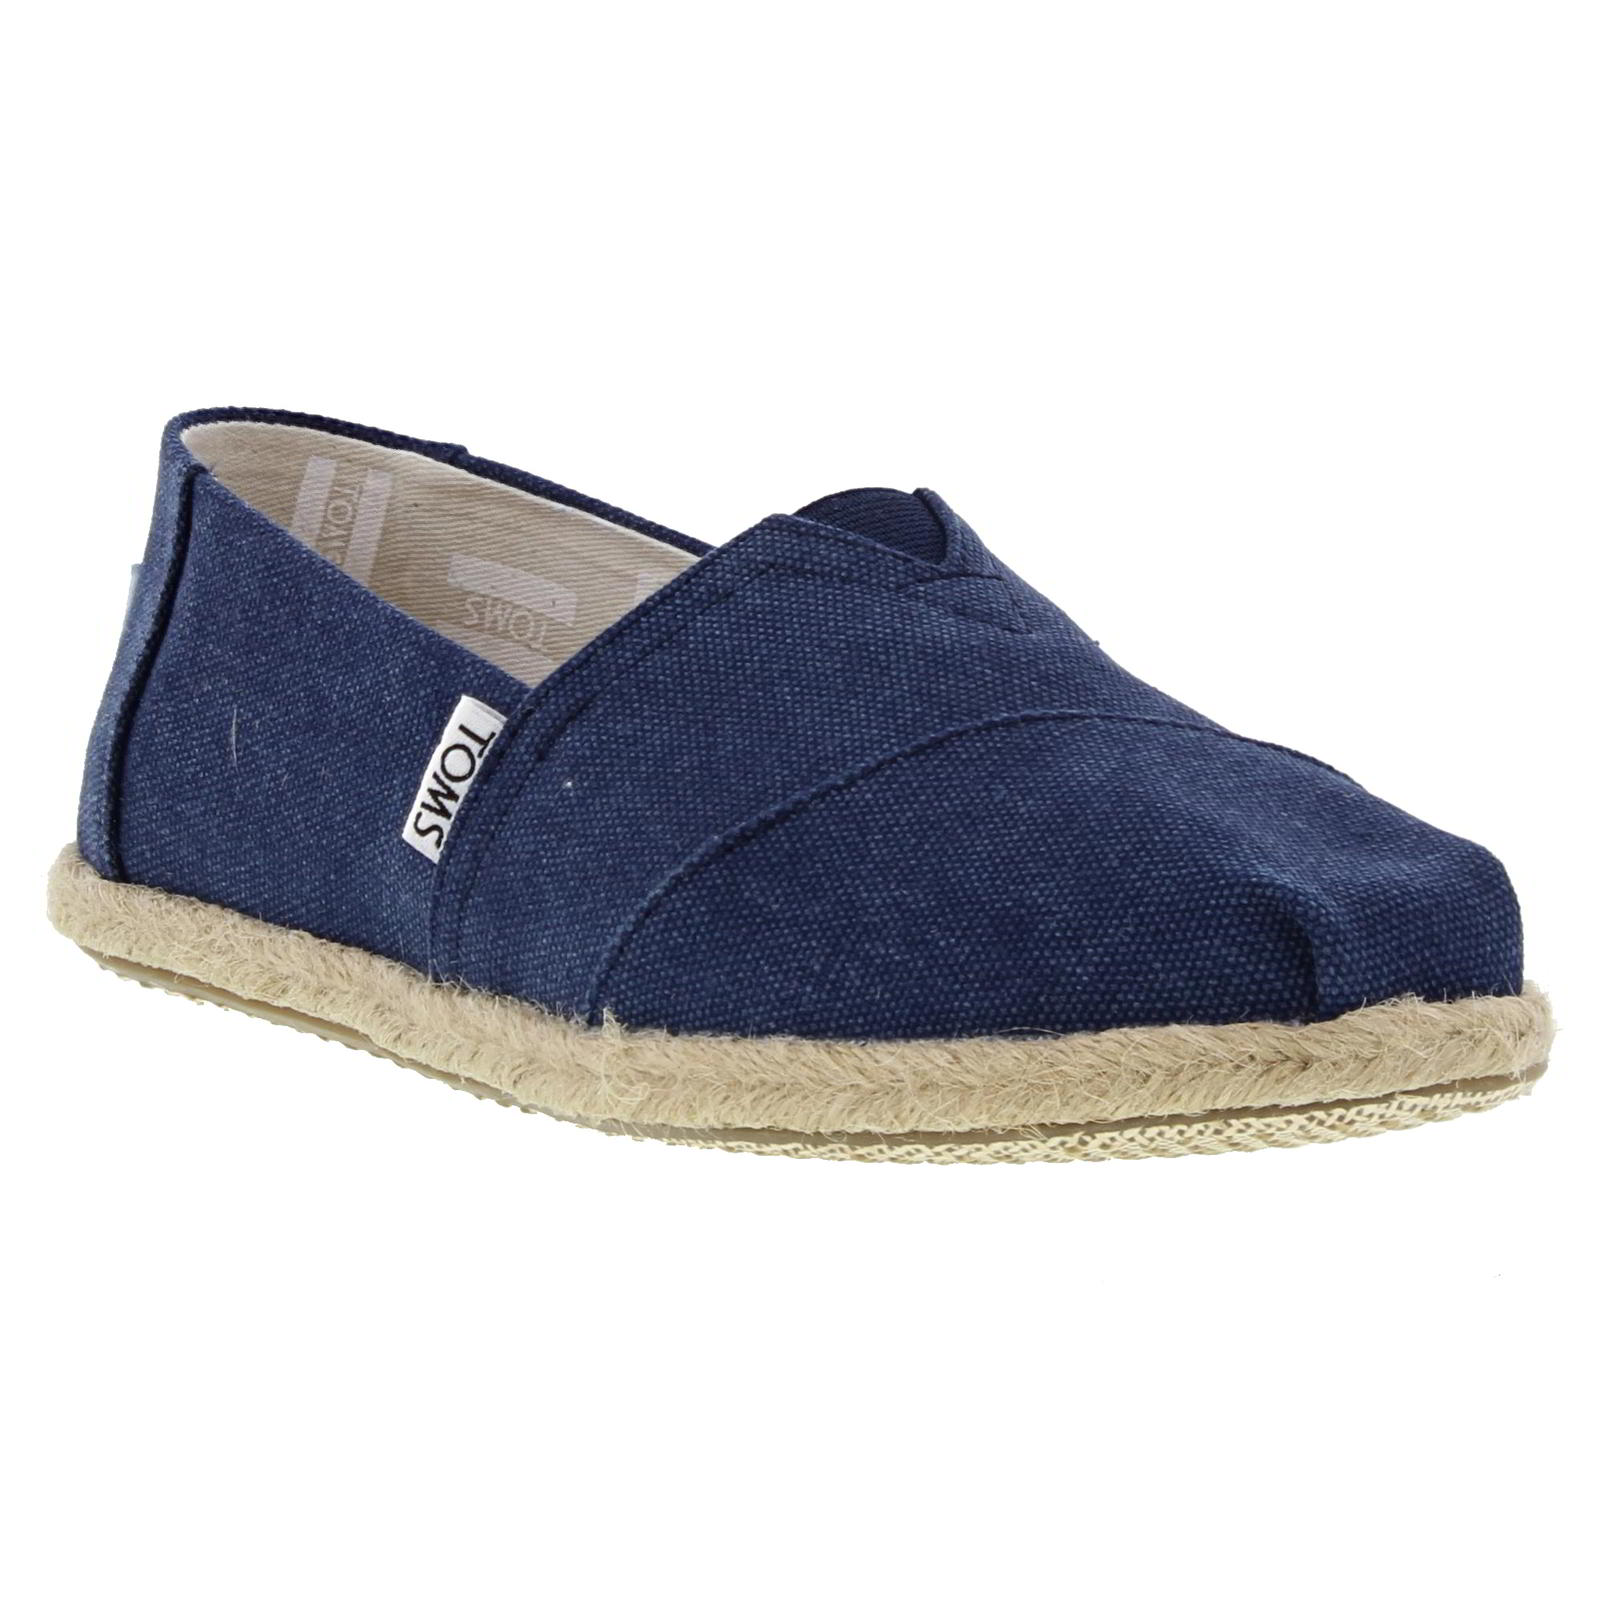 TOMS Toms Womens Classic Espadrille Vegan Shoes - Navy Washed 2951